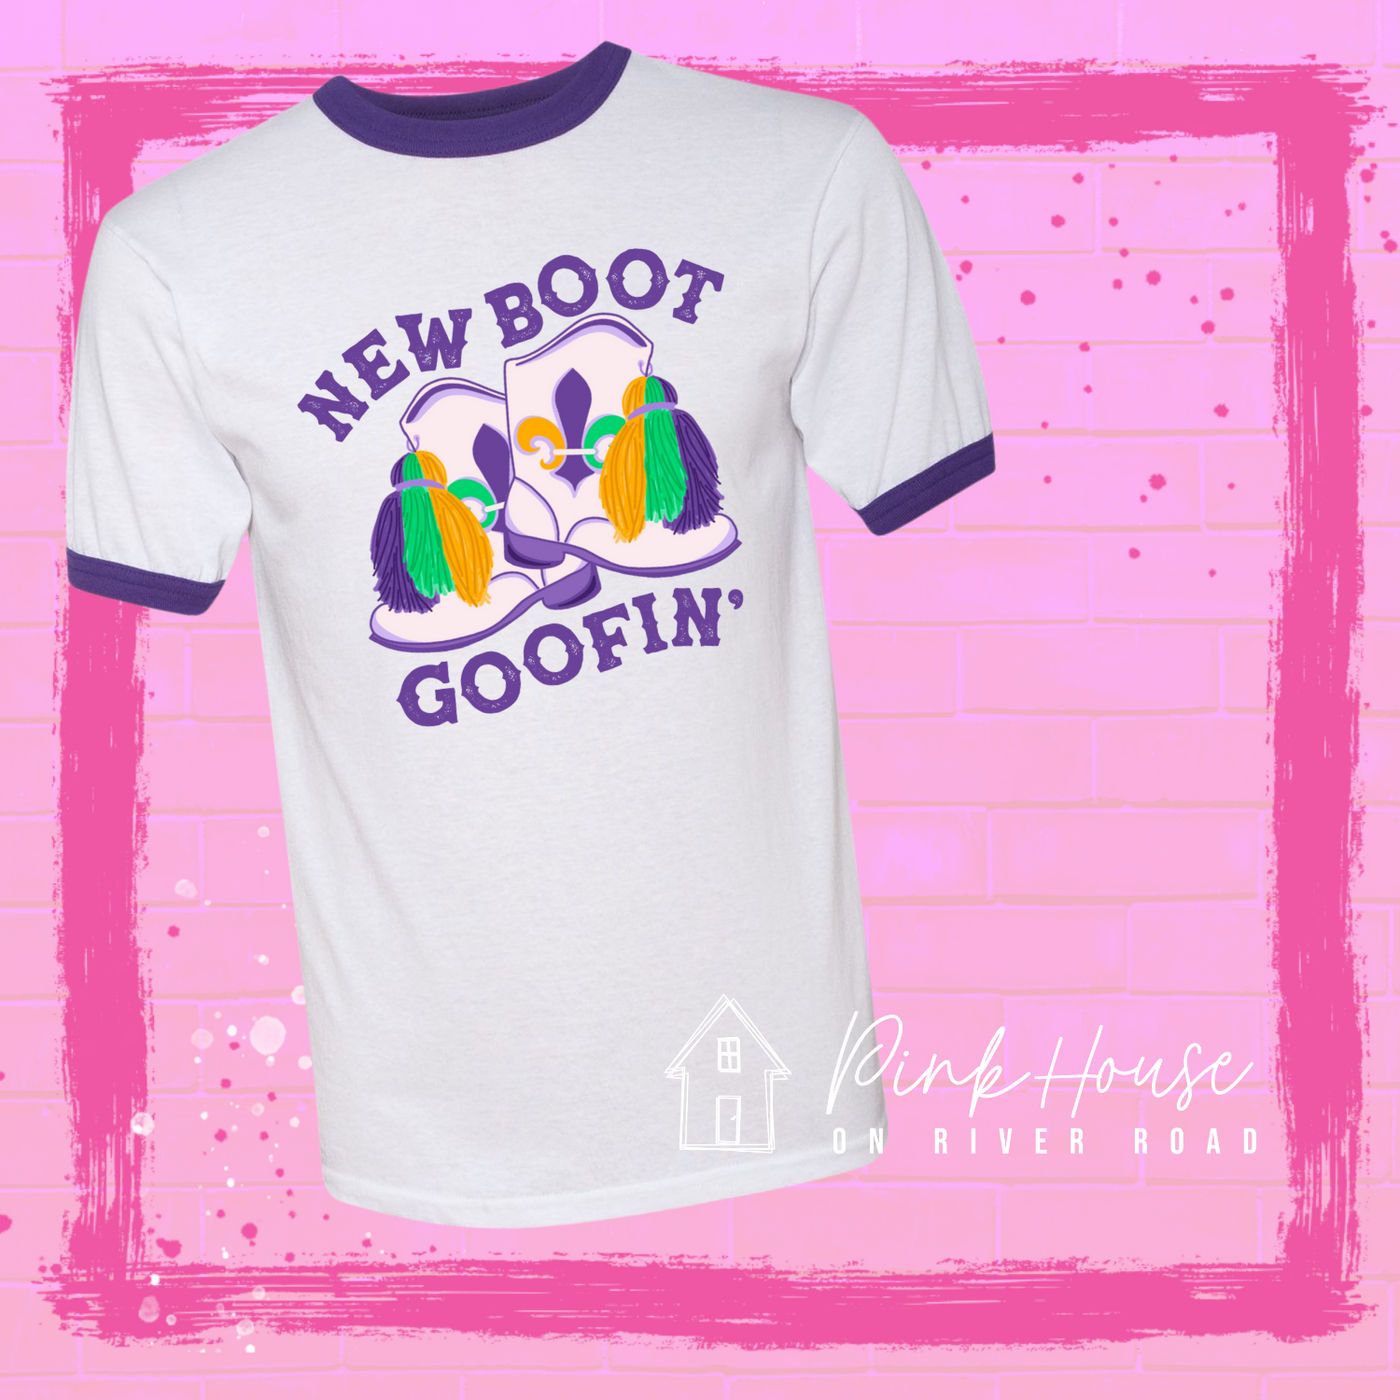 A white/purple tee with a graphic. Graphic is of a pair of majorette boots, the boots have a tassel and fleur de lis both in gold, green and purple. the words New Boot are above the boots and the word goofin' is below thee boots the words are in purple.